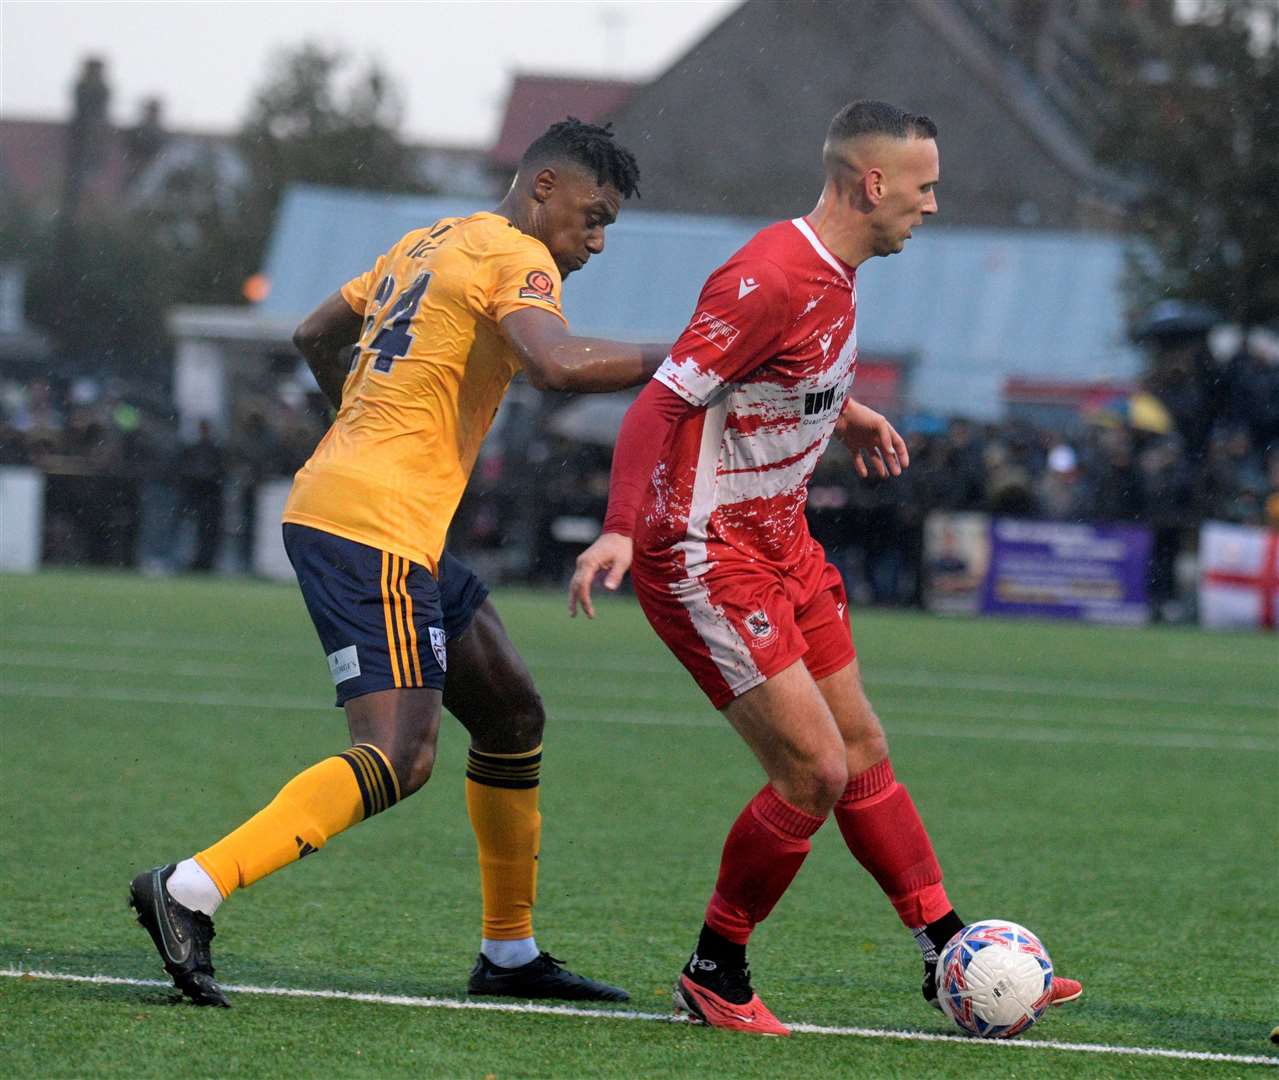 Leading scorer Joe Taylor in possession against Woking. Picture: Barry Goodwin